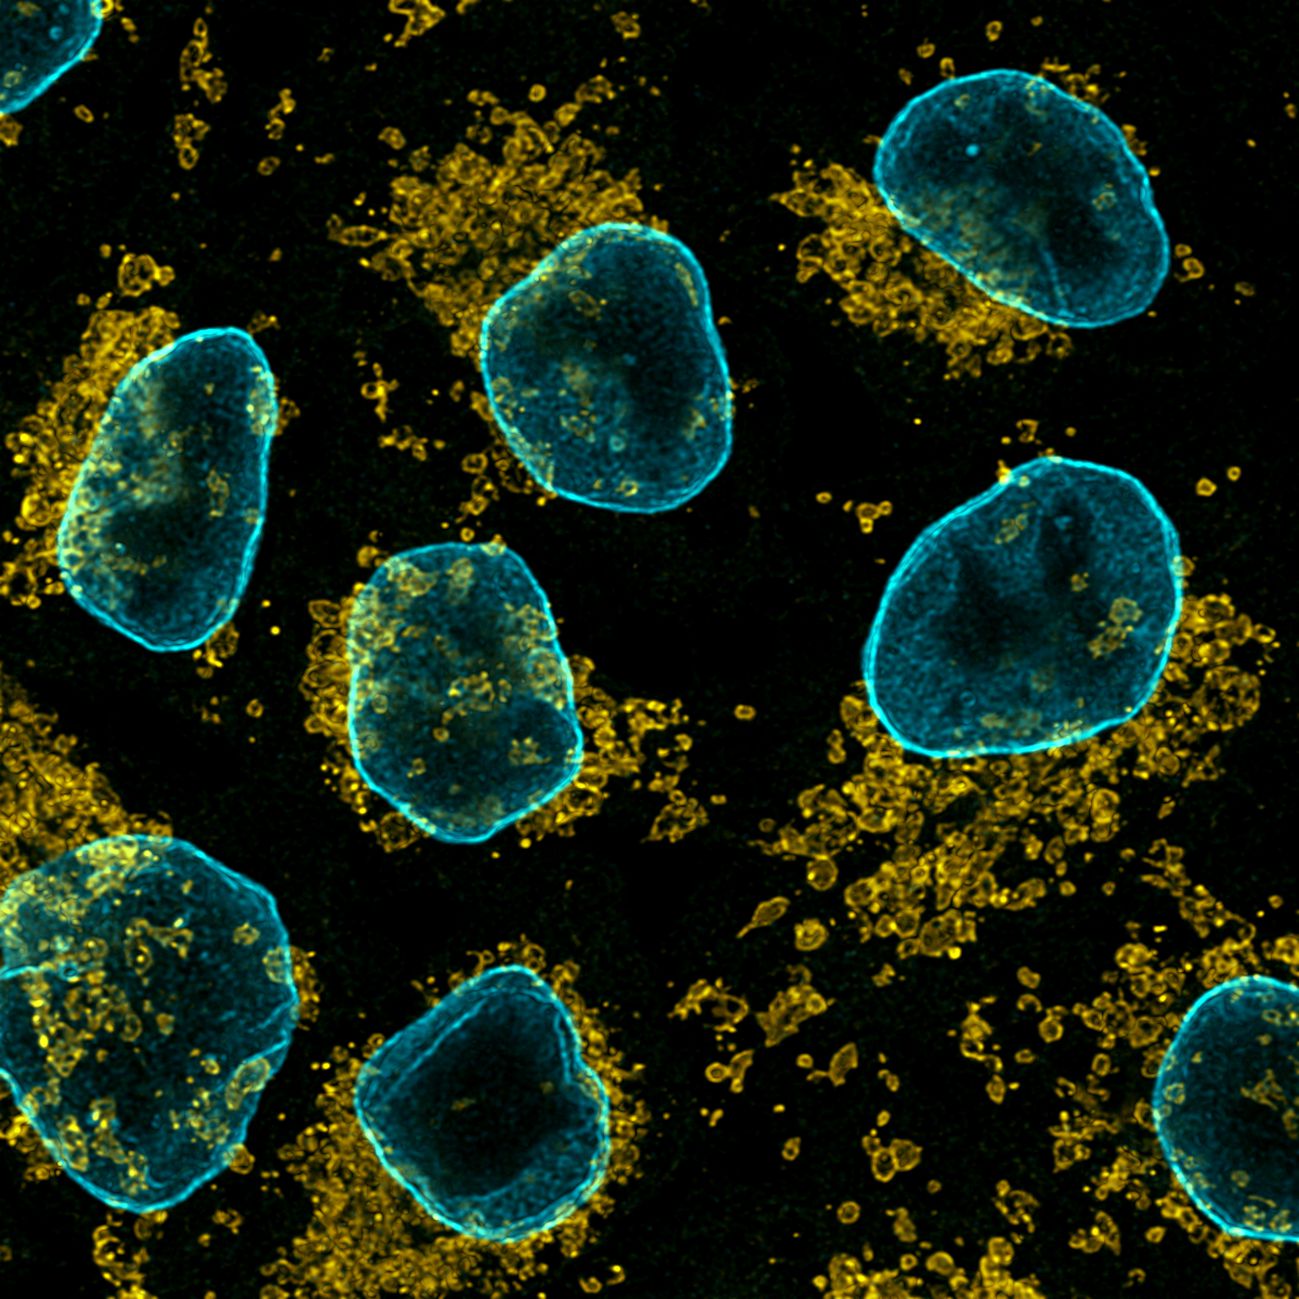 Immunofluorescence of HeLa: PFA-fixed HeLa cells were stained with anti-TOM20 (11802-1-AP) labeled with FlexAble CoraLite® Plus 550 Kit (KFA002, yellow) and anti-Lamin B1 (12987-1-AP) labeled with FlexAble CoraLite® Plus 650 Kit (KFA003, cyan).​ Confocal images were acquired with a 100x oil objective and post-processed. Images were recorded at the Core Facility Bioimaging at the Biomedical Center, LMU Munich.